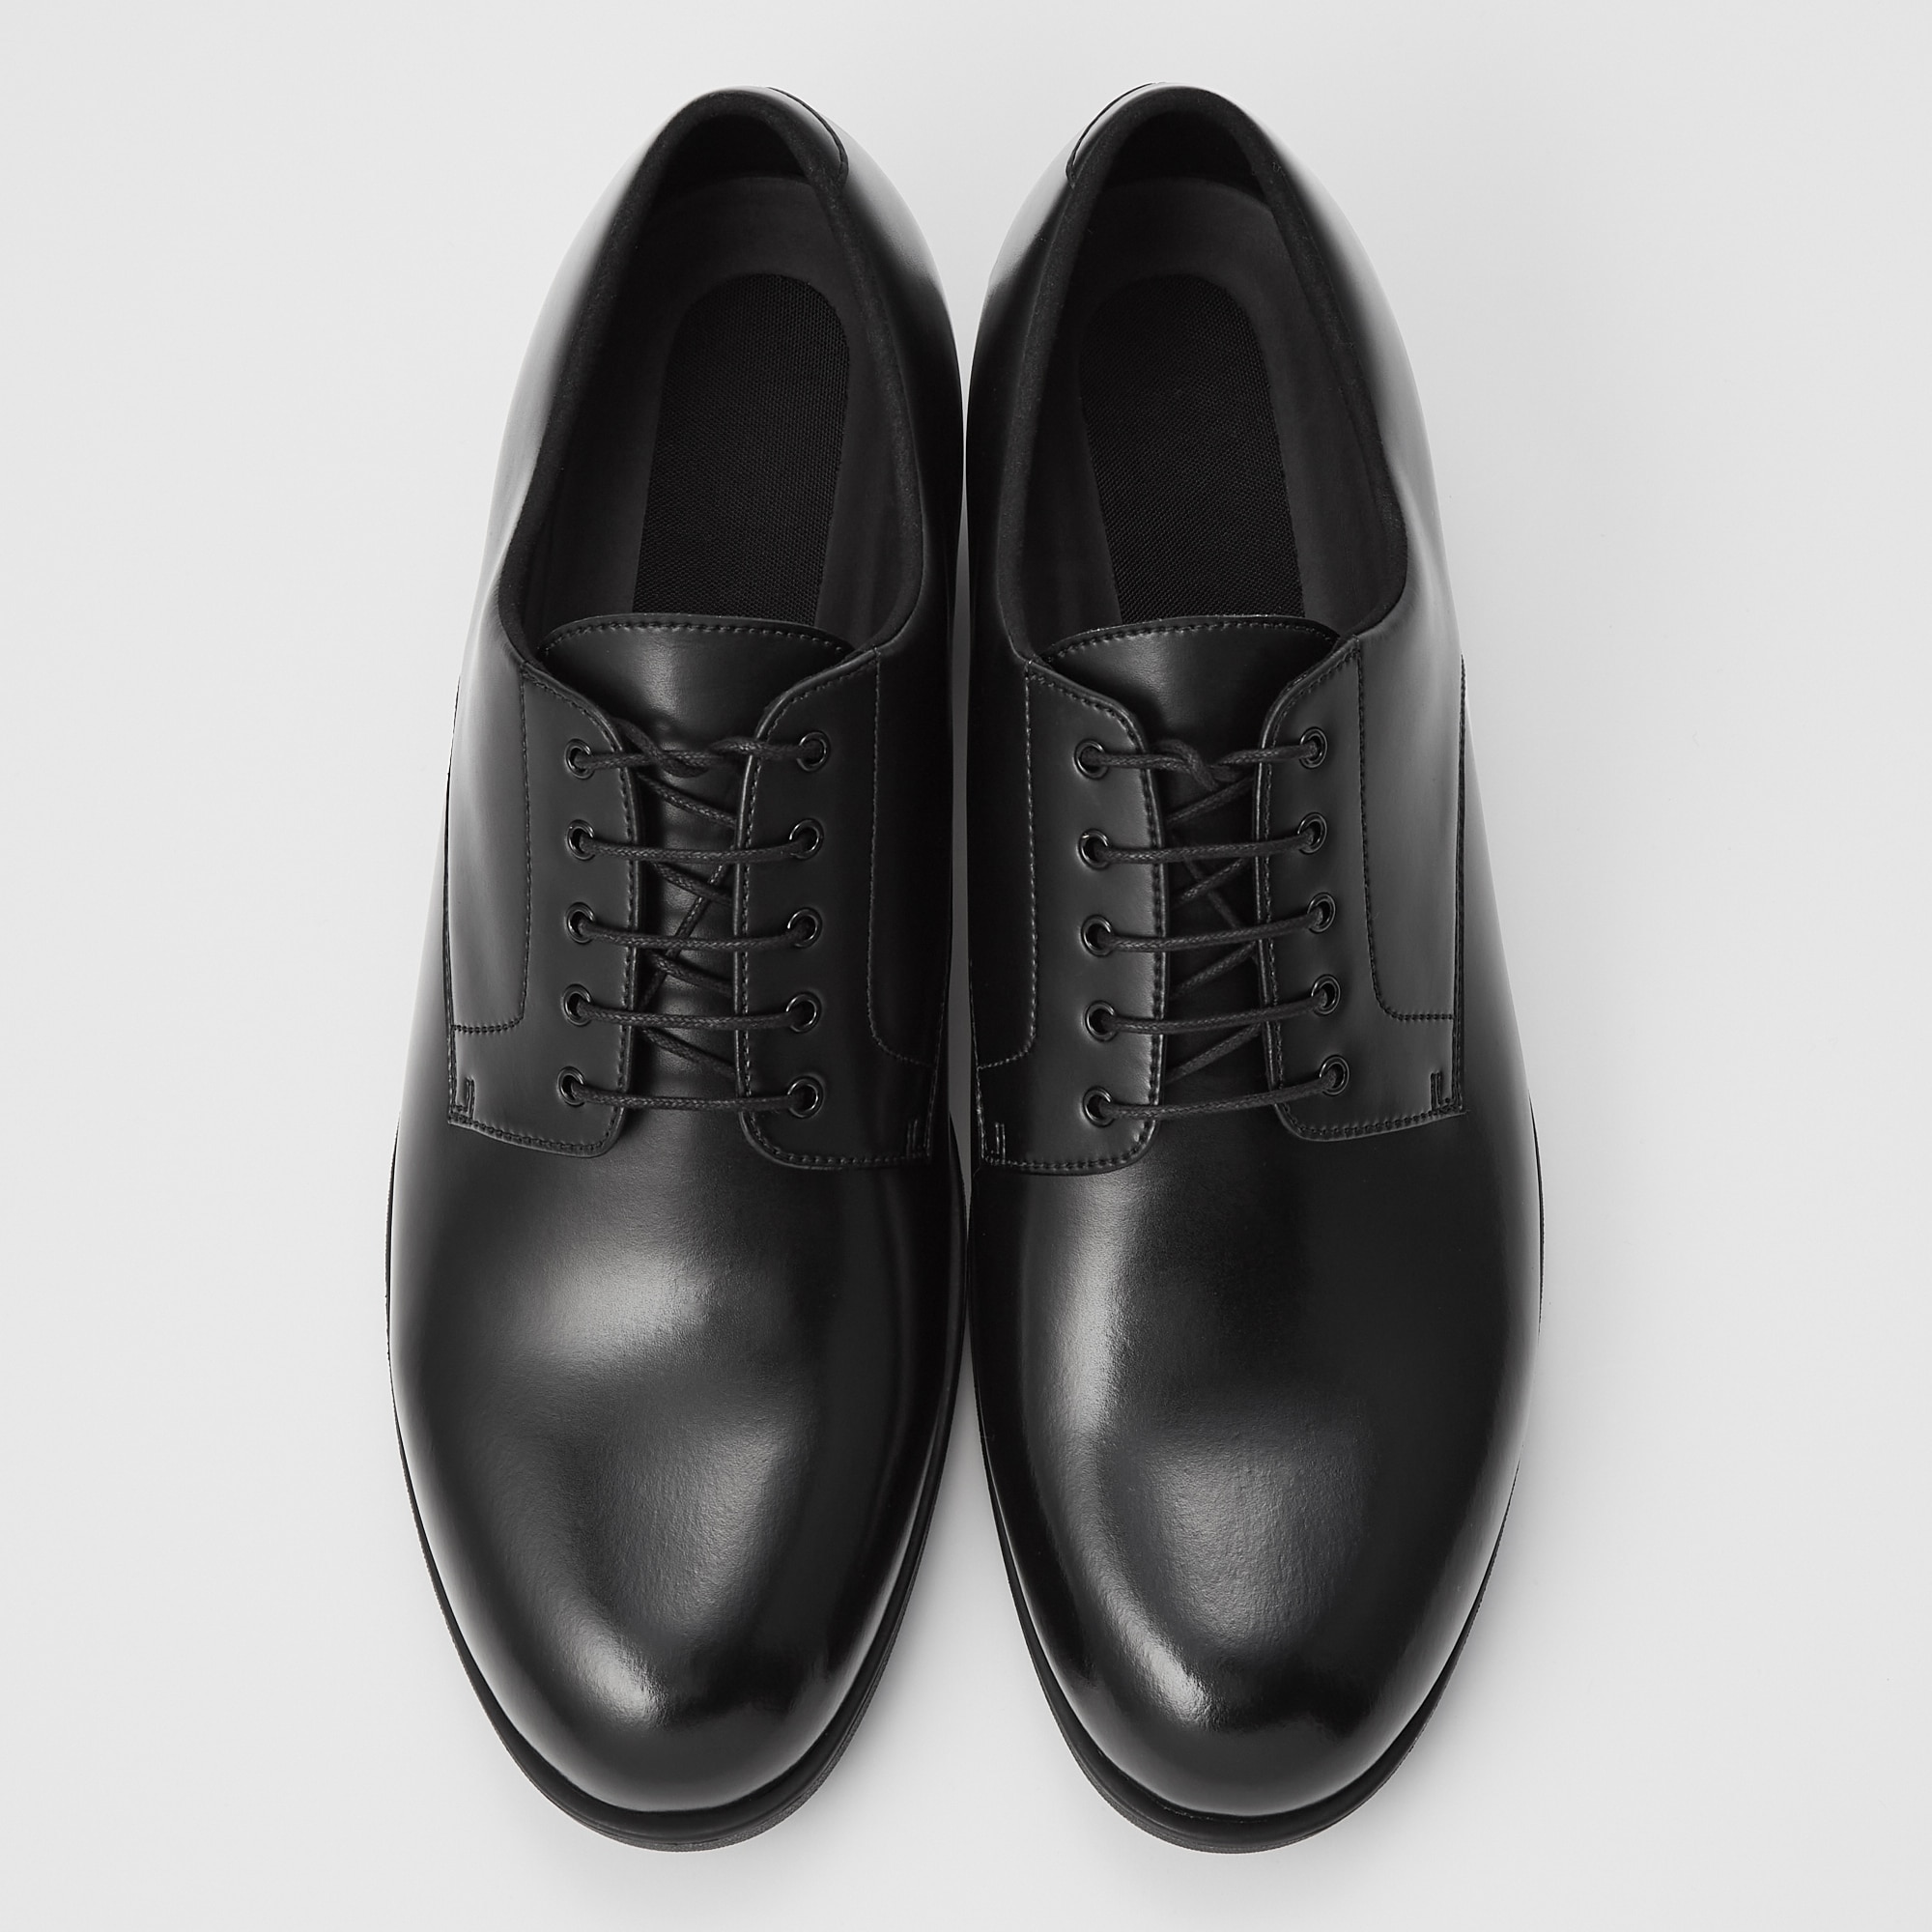 Shop Trendy Japanese Brand Uniqlos Shoes Starting Under 4  Footwear News